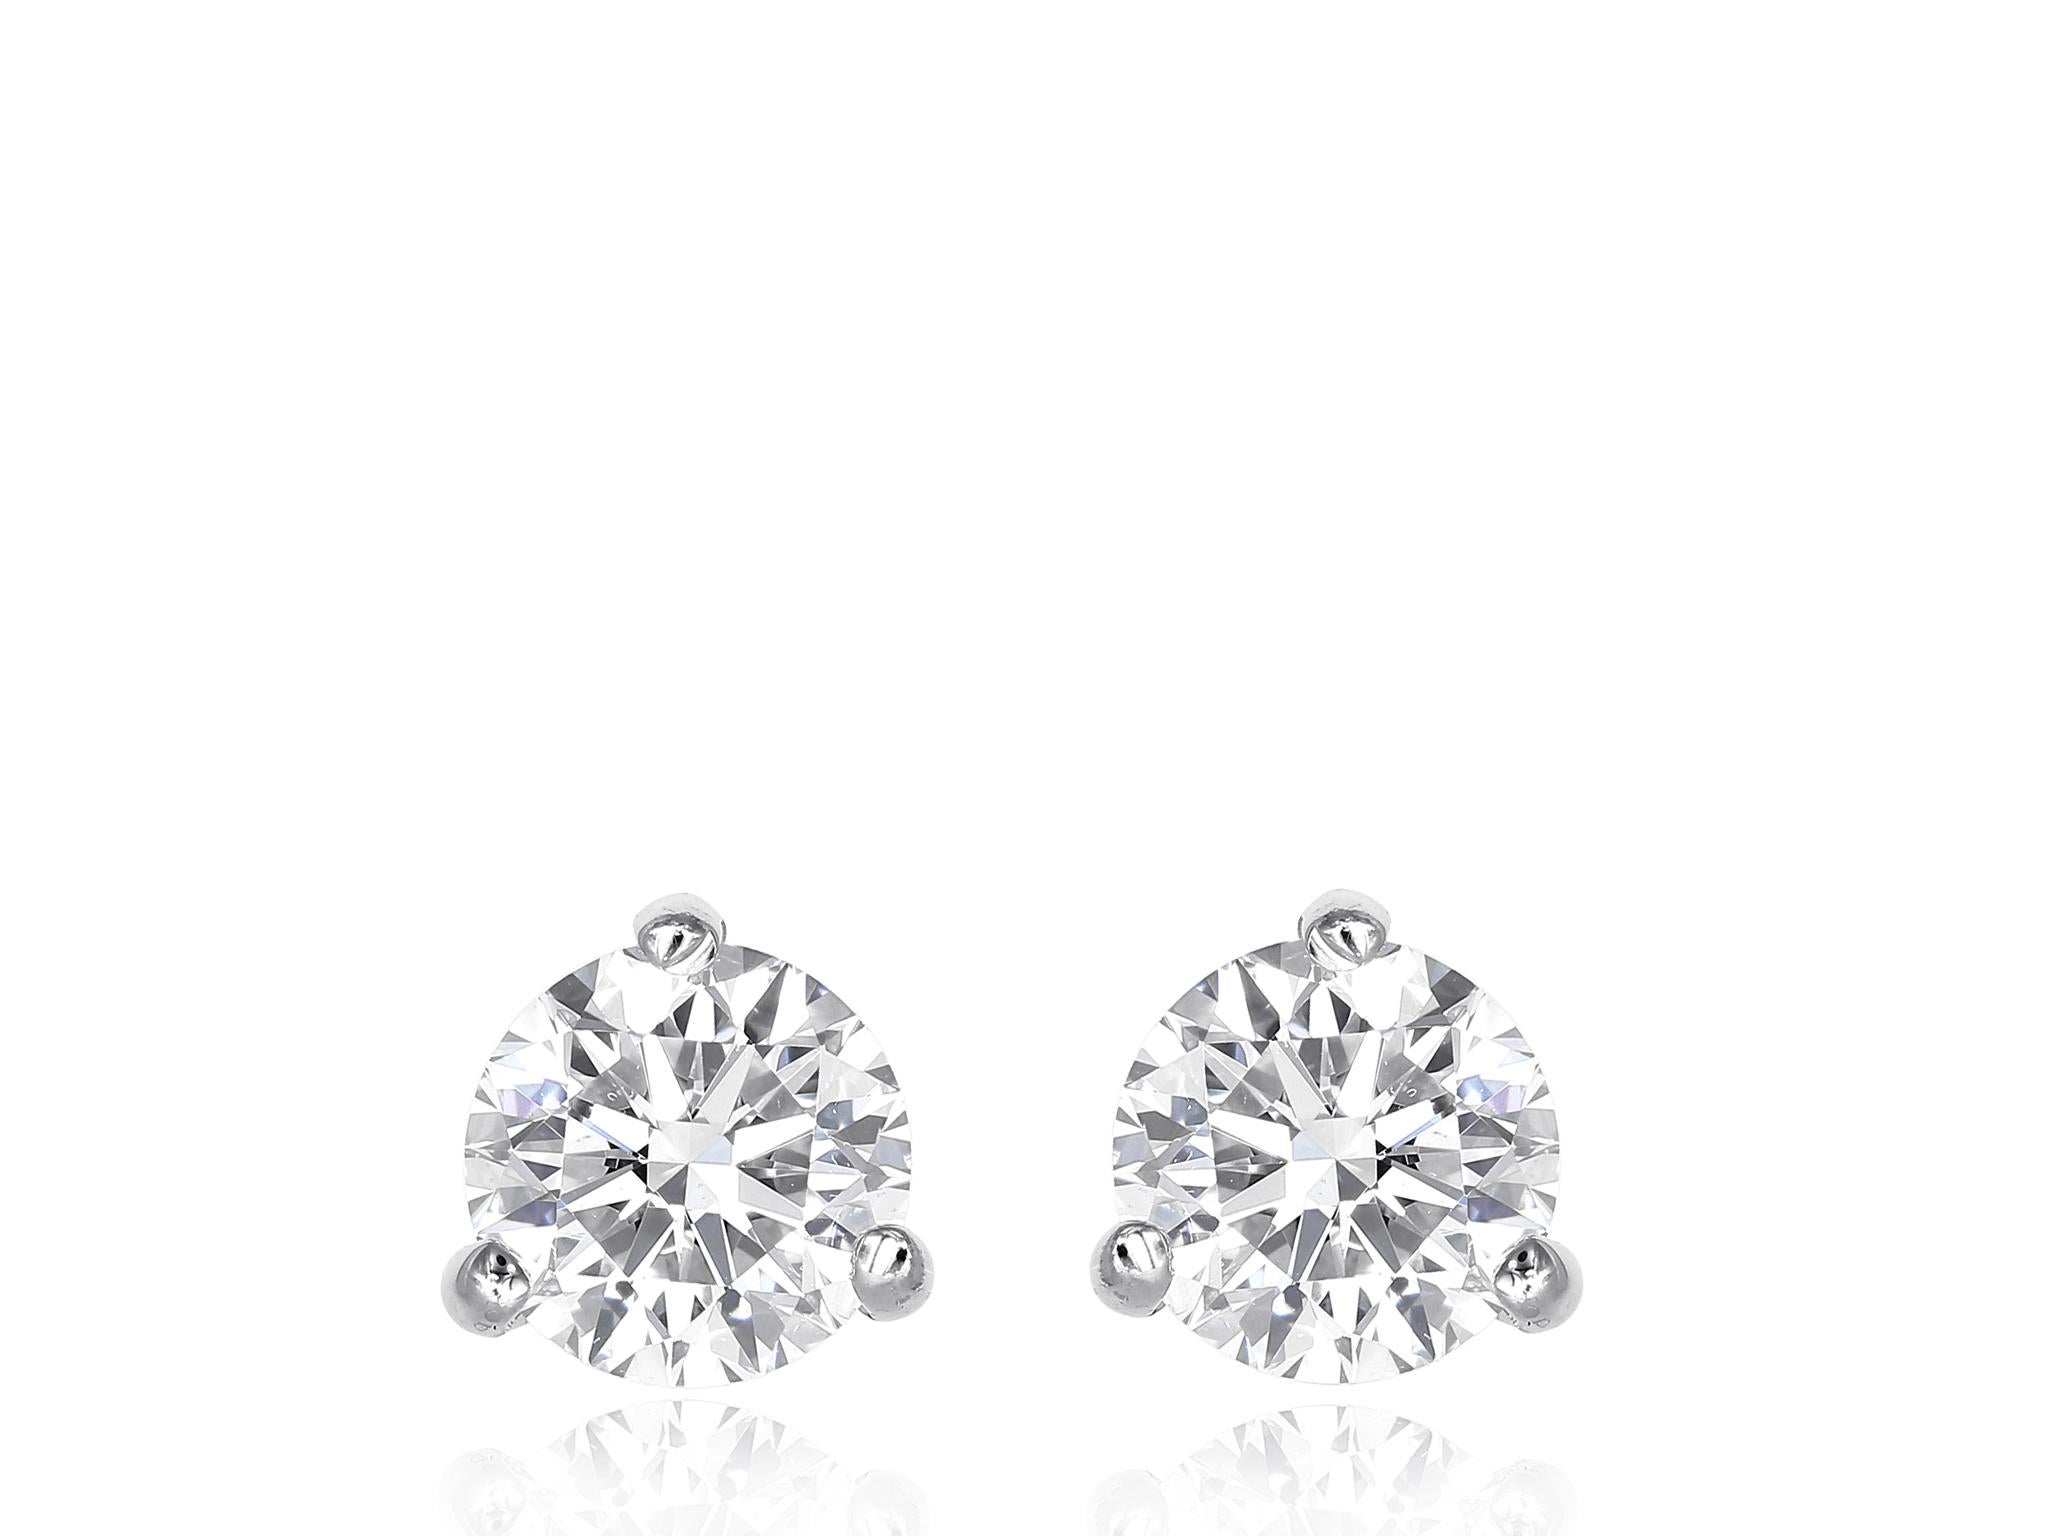 Diamond stud earrings consisting of two round brilliant cut diamonds with a total weight of 5.14 carats, with a color and clarity of H-I SI2 respectfully, set in a white gold three prong martini mounting with friction post.